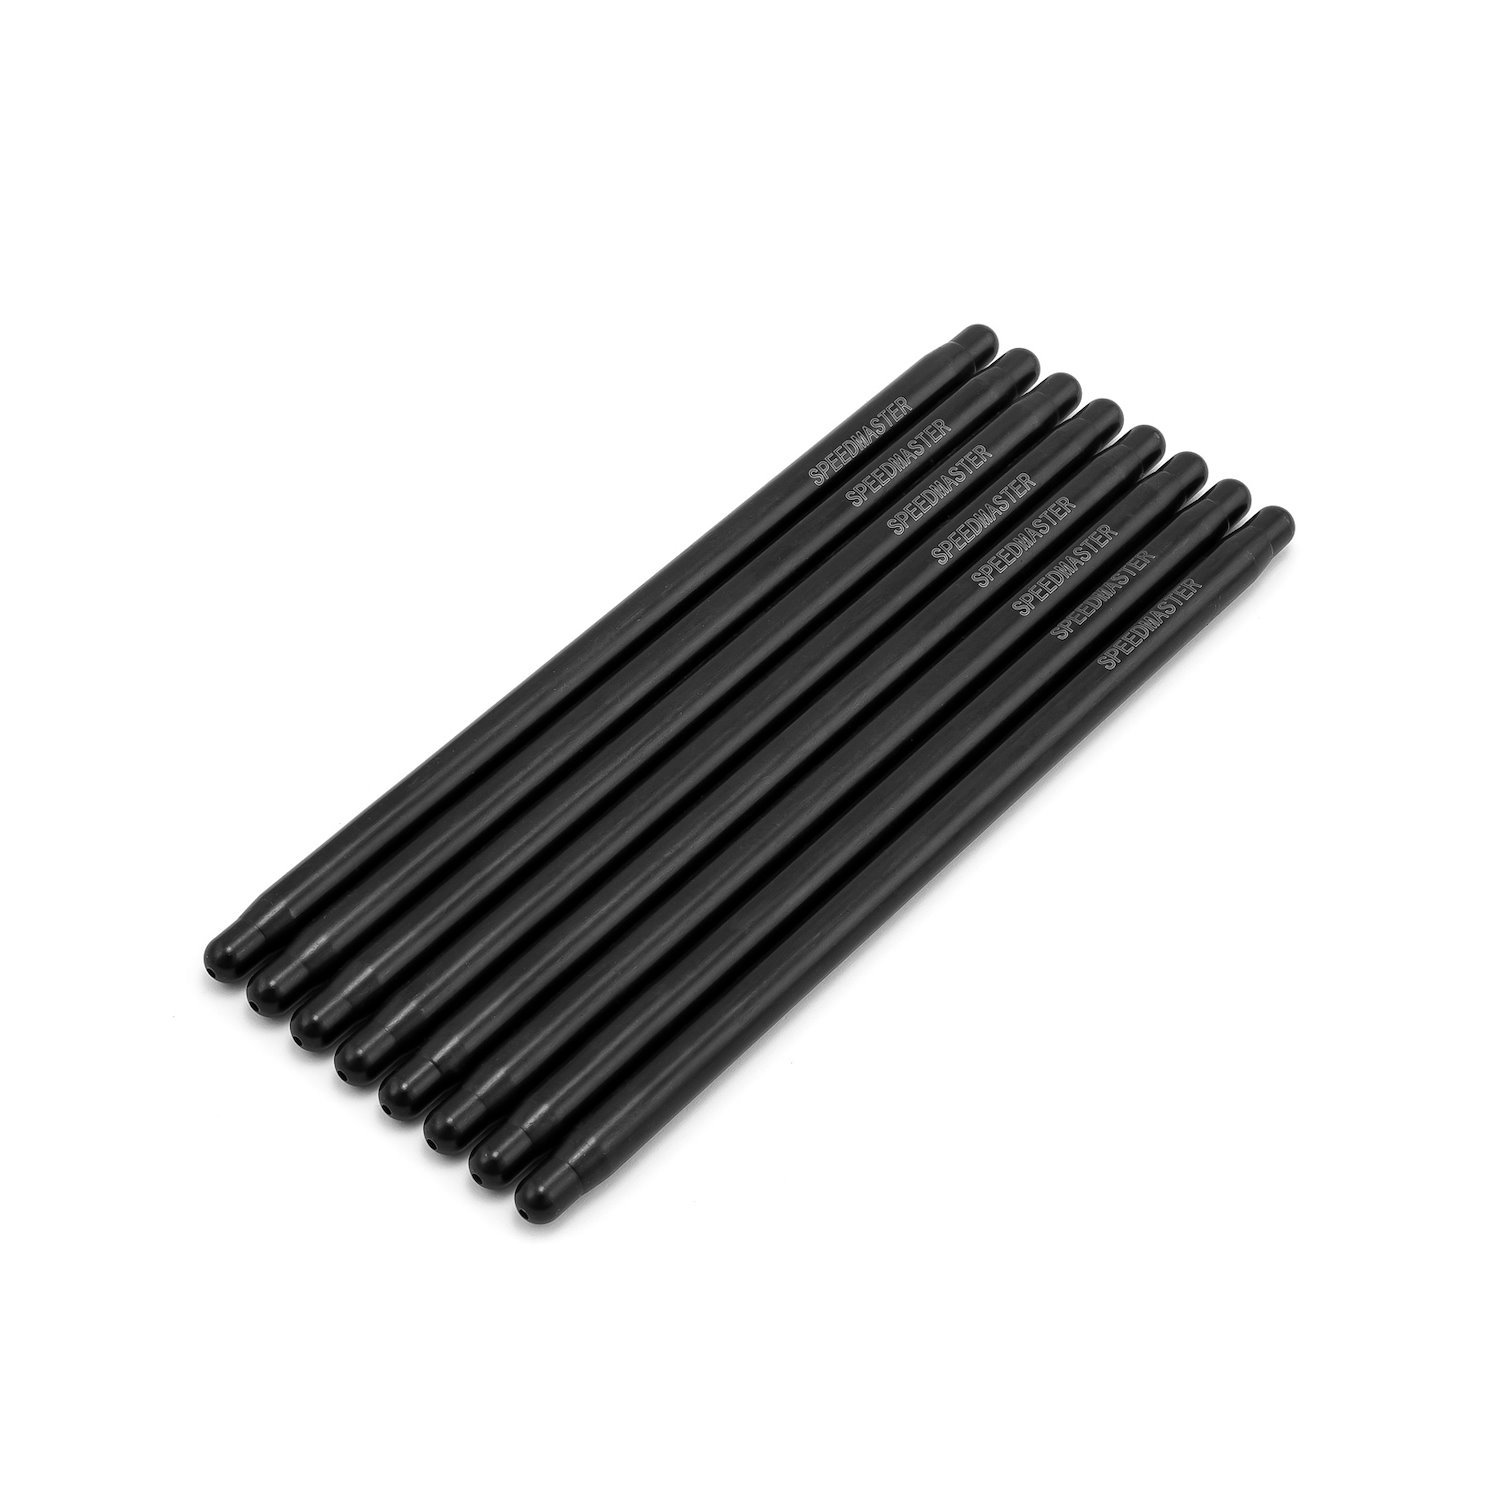 1-254-033 8.650 in. Chromoly Heat-Treated 3/8 in. 0.080 in. Wall DNA One-Piece Pushrods